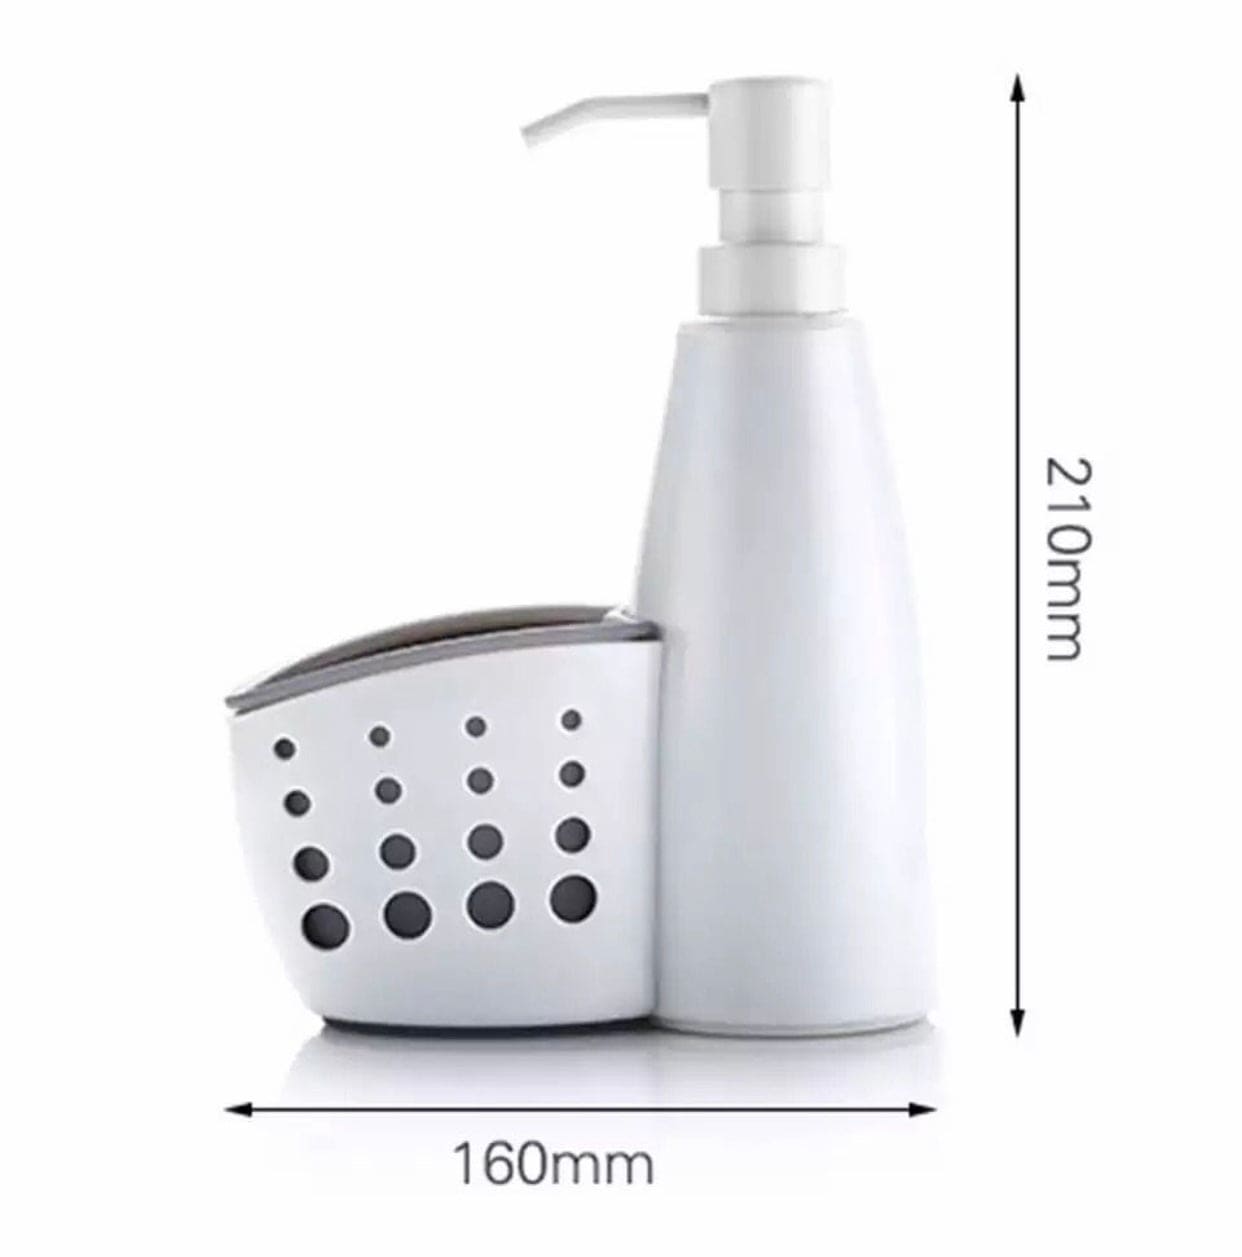 2 in 1 Refillable Liquid Detergent Bottle And Sponge Holder, Liquid Detergent Bottle Dispenser Storage Box